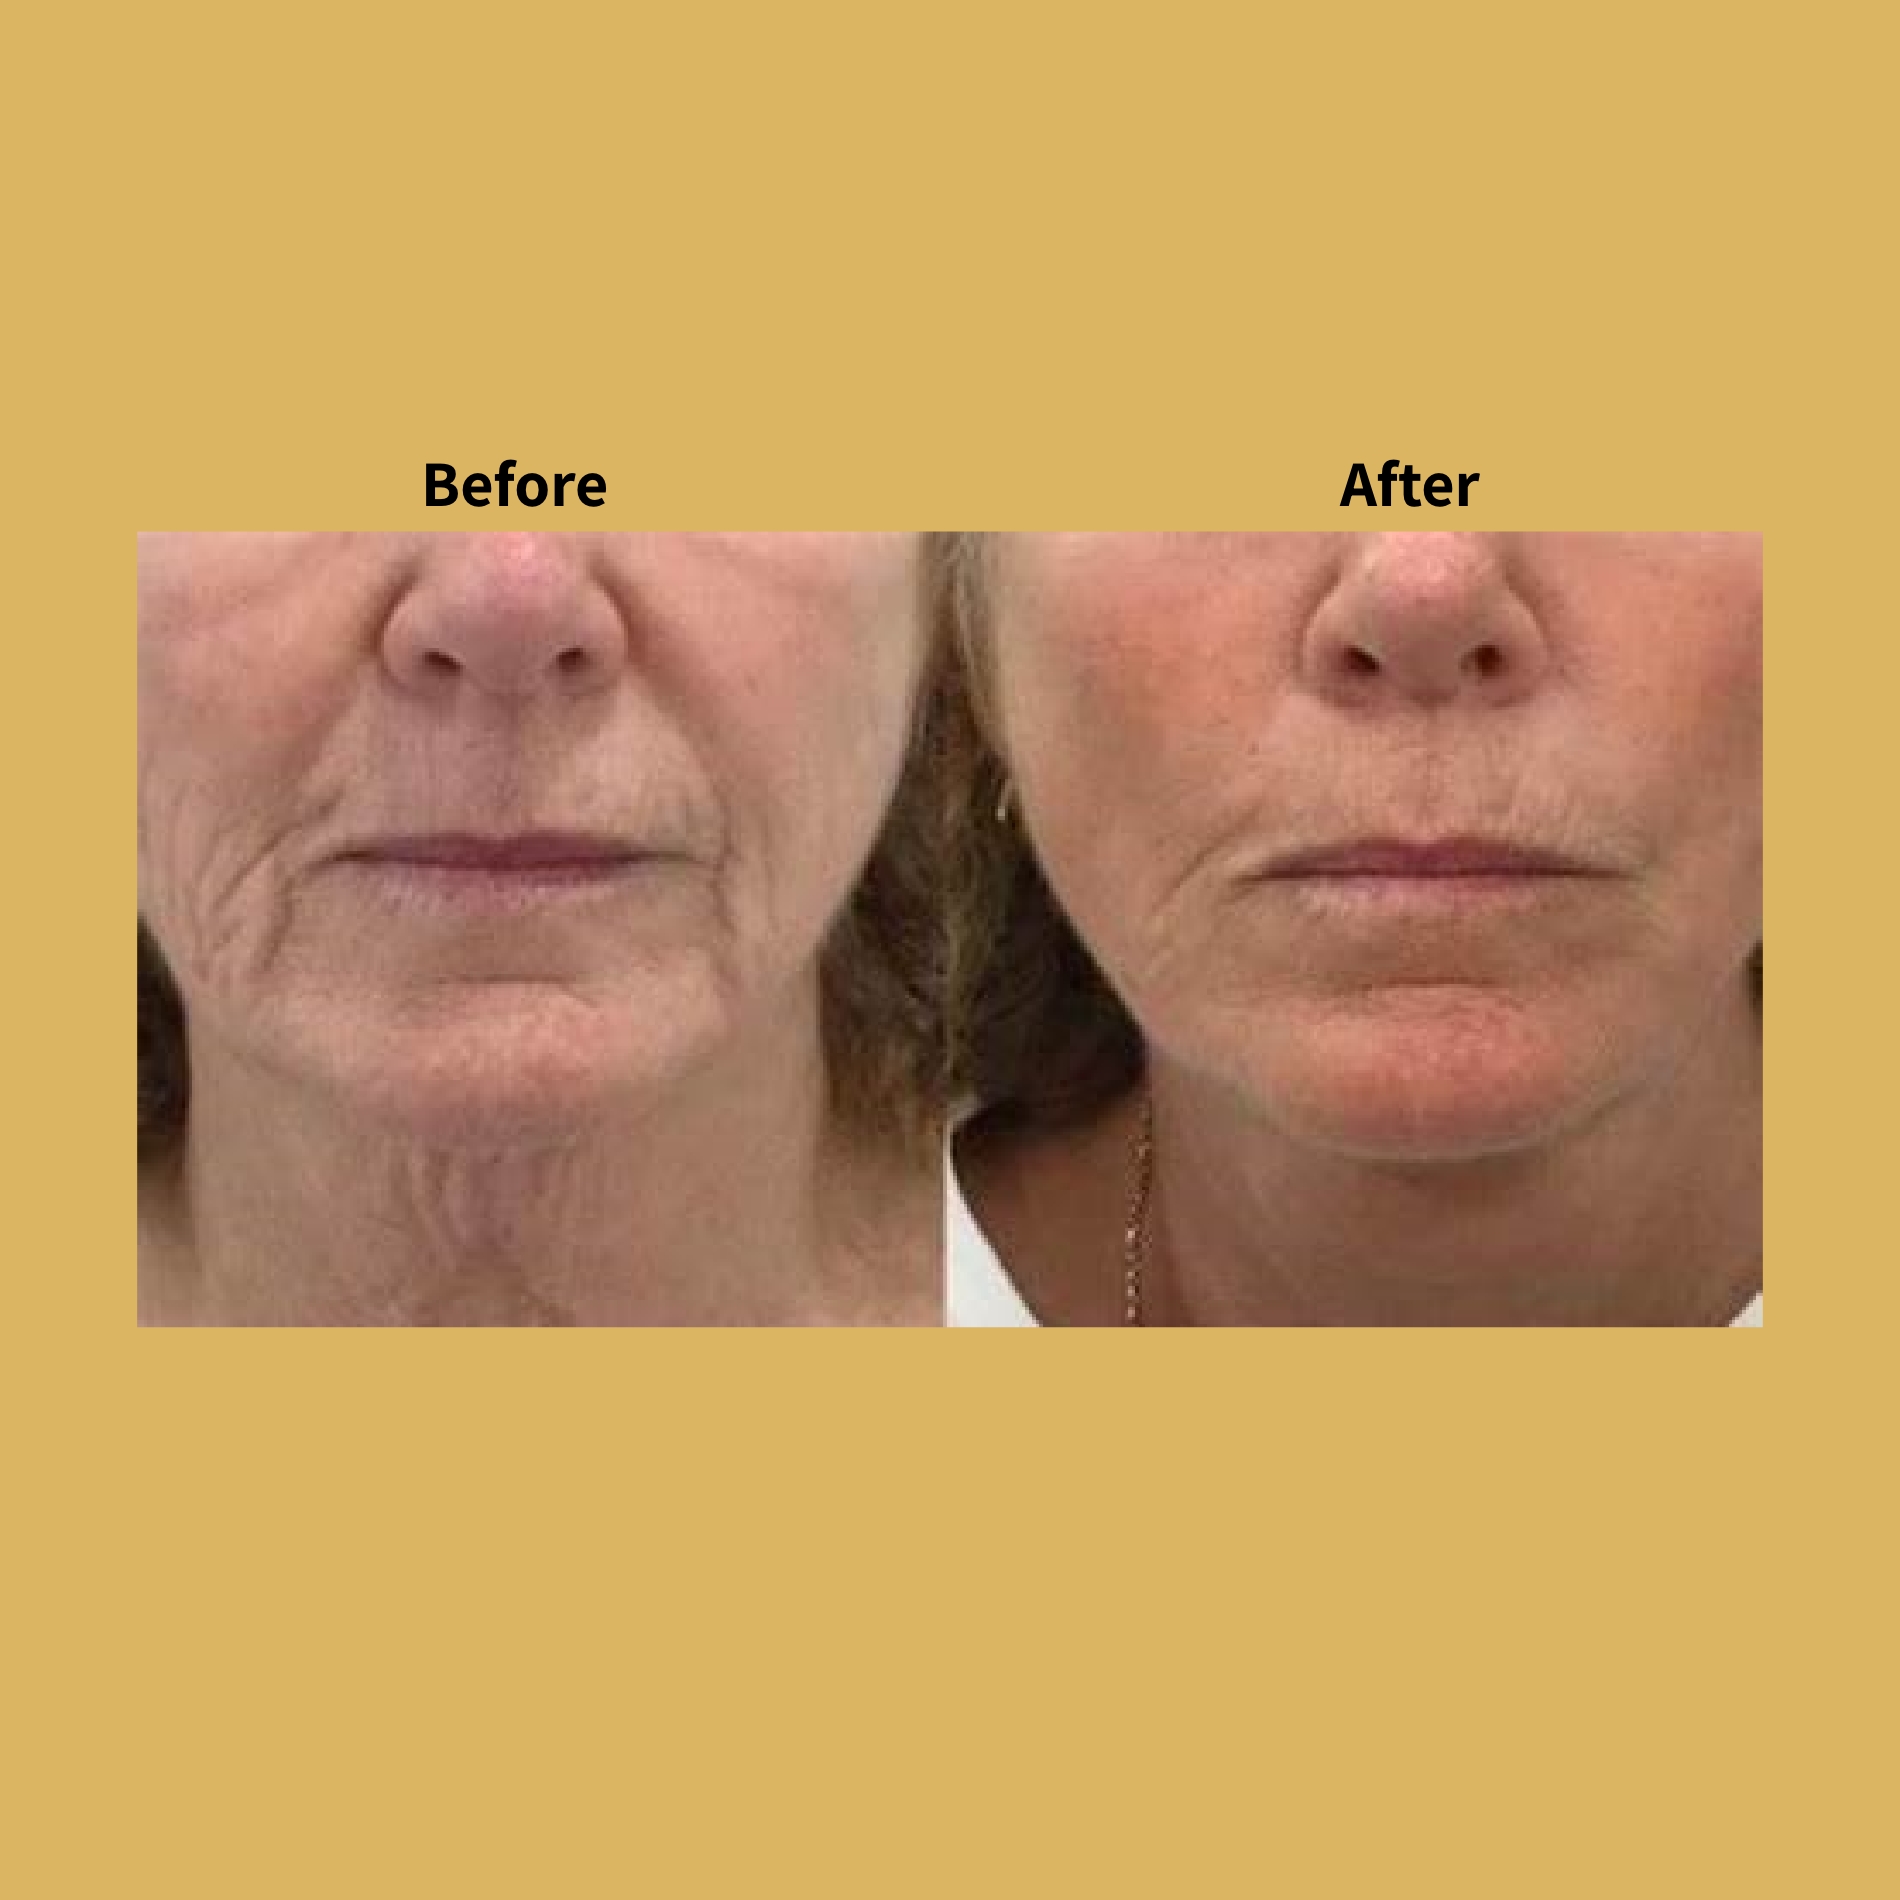 Opus Plasma Skin Tightening Before and After Treatment Photos | Soleil Medical & Beauty Spa in Portland, OR